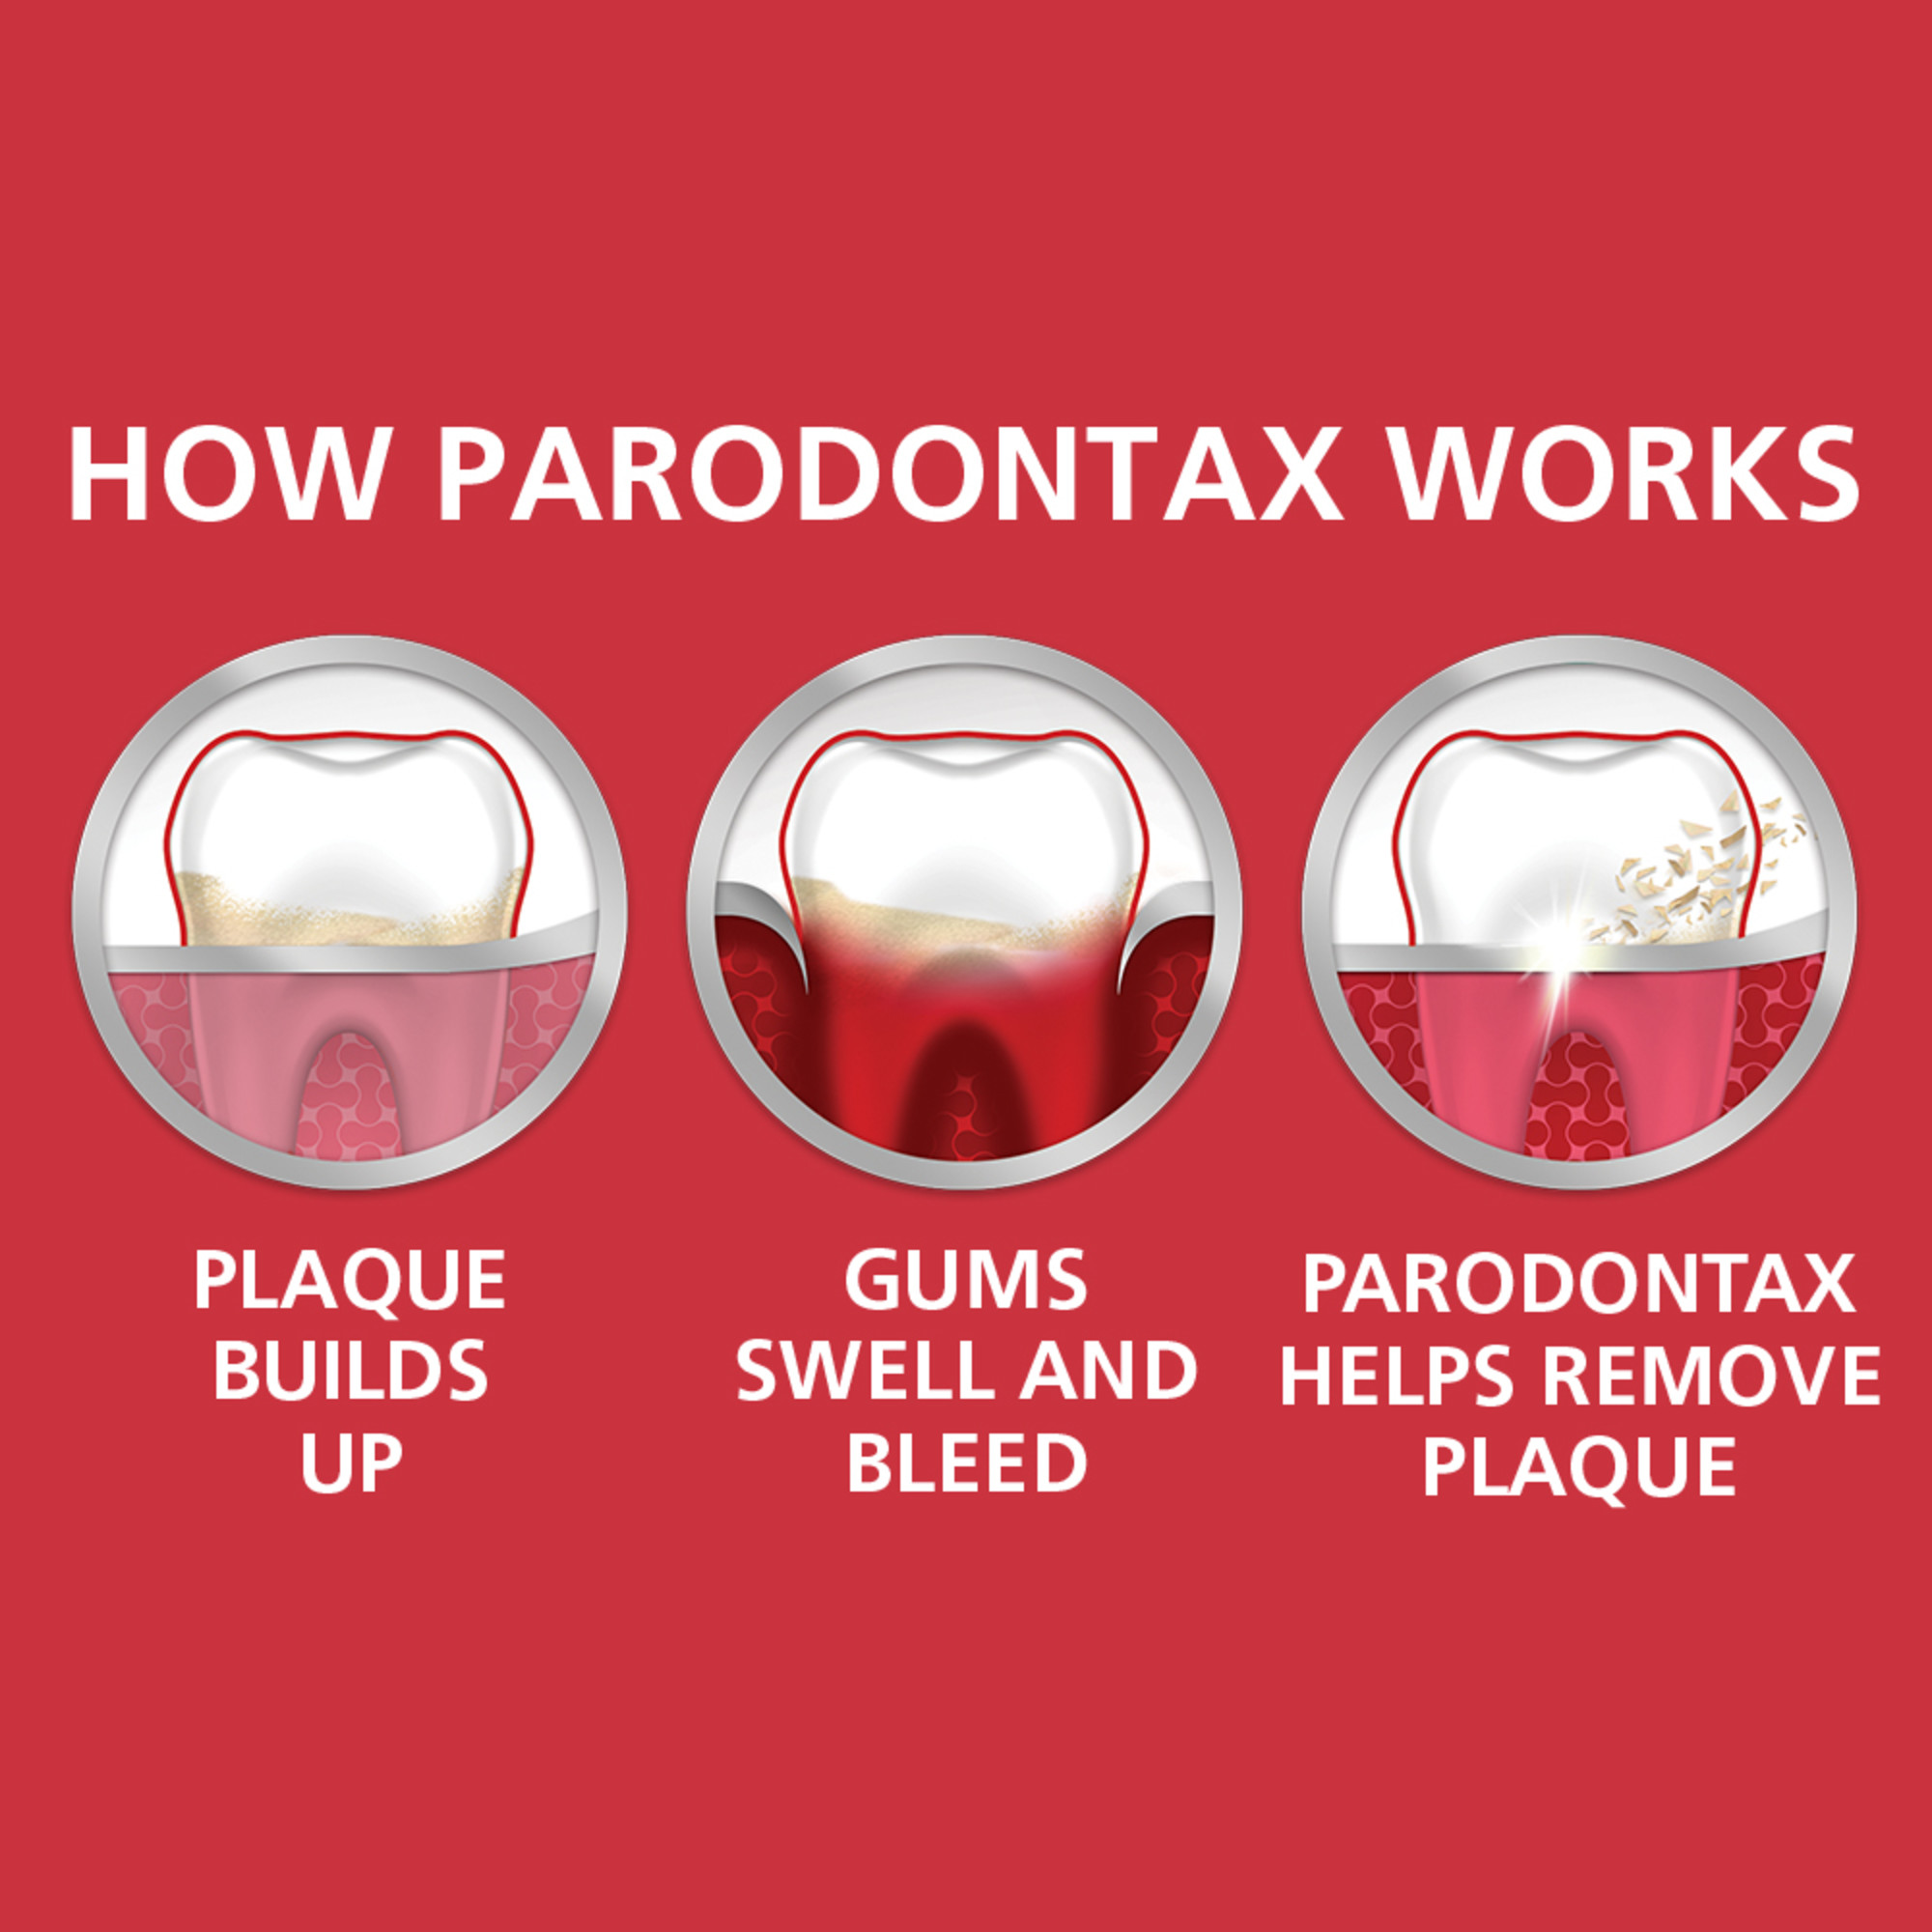 Parodontax Complete Protection Teeth Whitening Toothpaste for Bleeding Gums, 3.4 oz - Unflavored - image 4 of 11